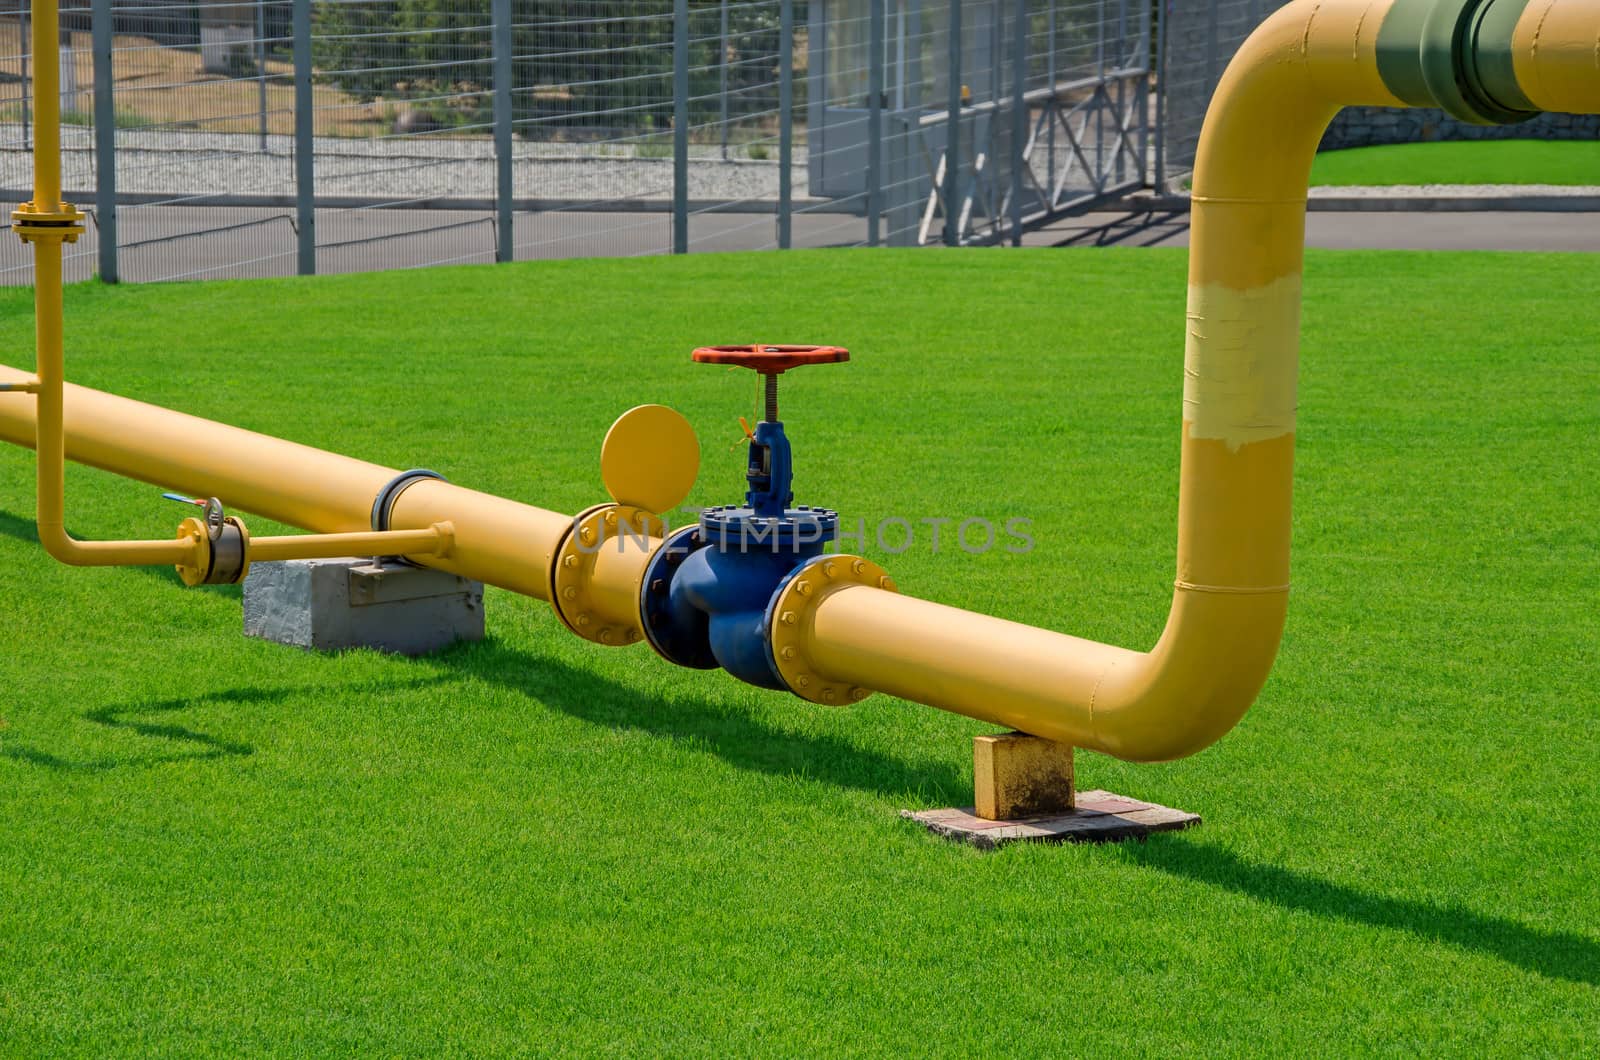 Image of main gas pipe valve overlap on a background of green grass.